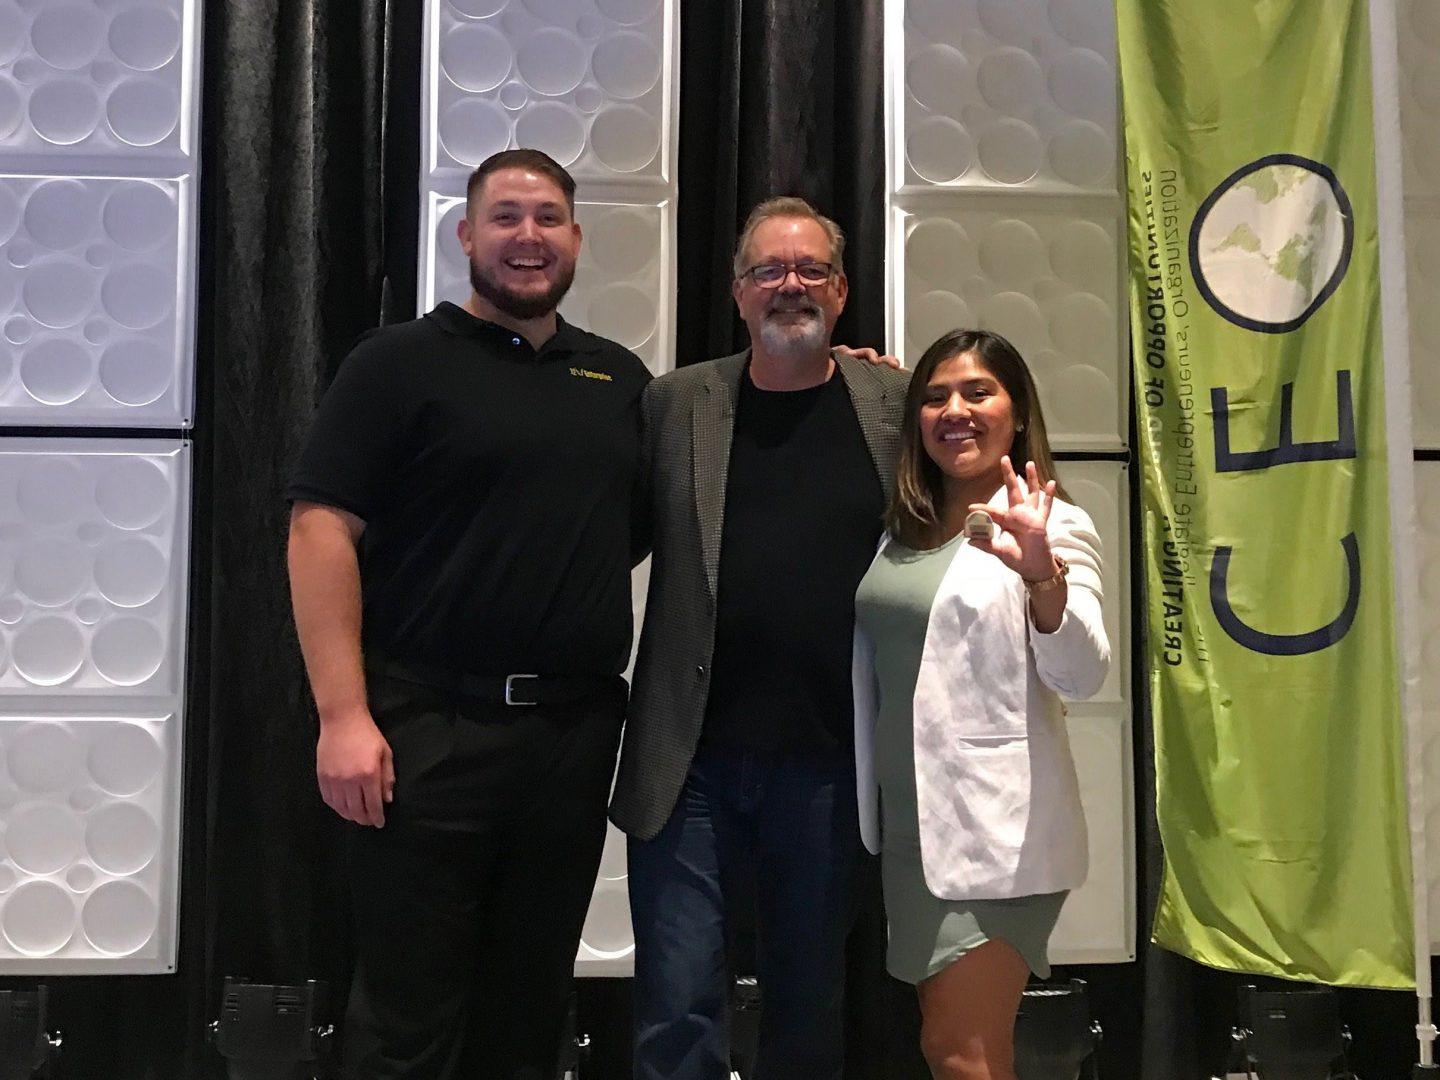 Dr. Timothy Stearns (center) stands with Entrepreneur Mentor Program students Tyler Puccio (left) and Rafalea Santillan (right), who won first and third place respectively, at the Collegiate Entrepreneurs’ Organization Global Conference and Pitch Competition in Kansas City, Missouri on Nov. 2 and 3.